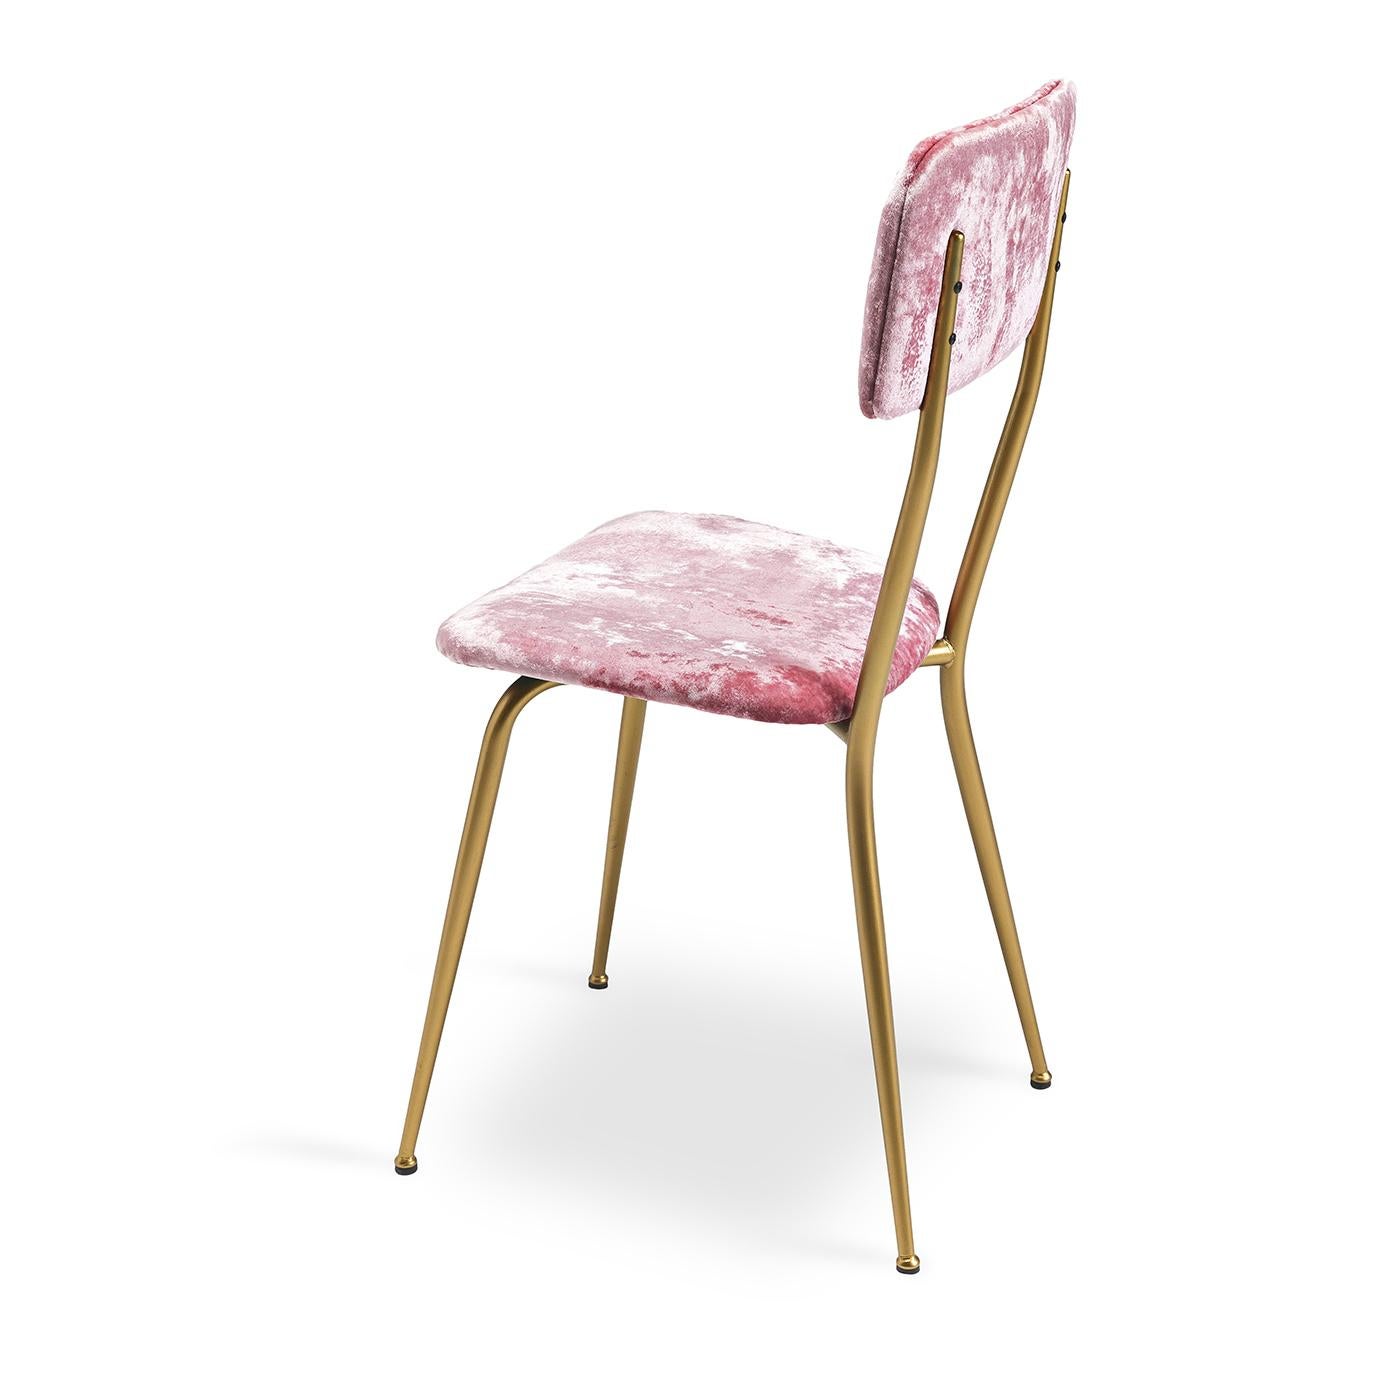 Sleek, sophisticated and undeniably feminine. The Miss Ava 6 chair is defined by its irresistible pink velvet upholstery, paired with a brushed brass frame for a modern edge. Offering a padded seat and backrest for optimal comfort, this chair makes